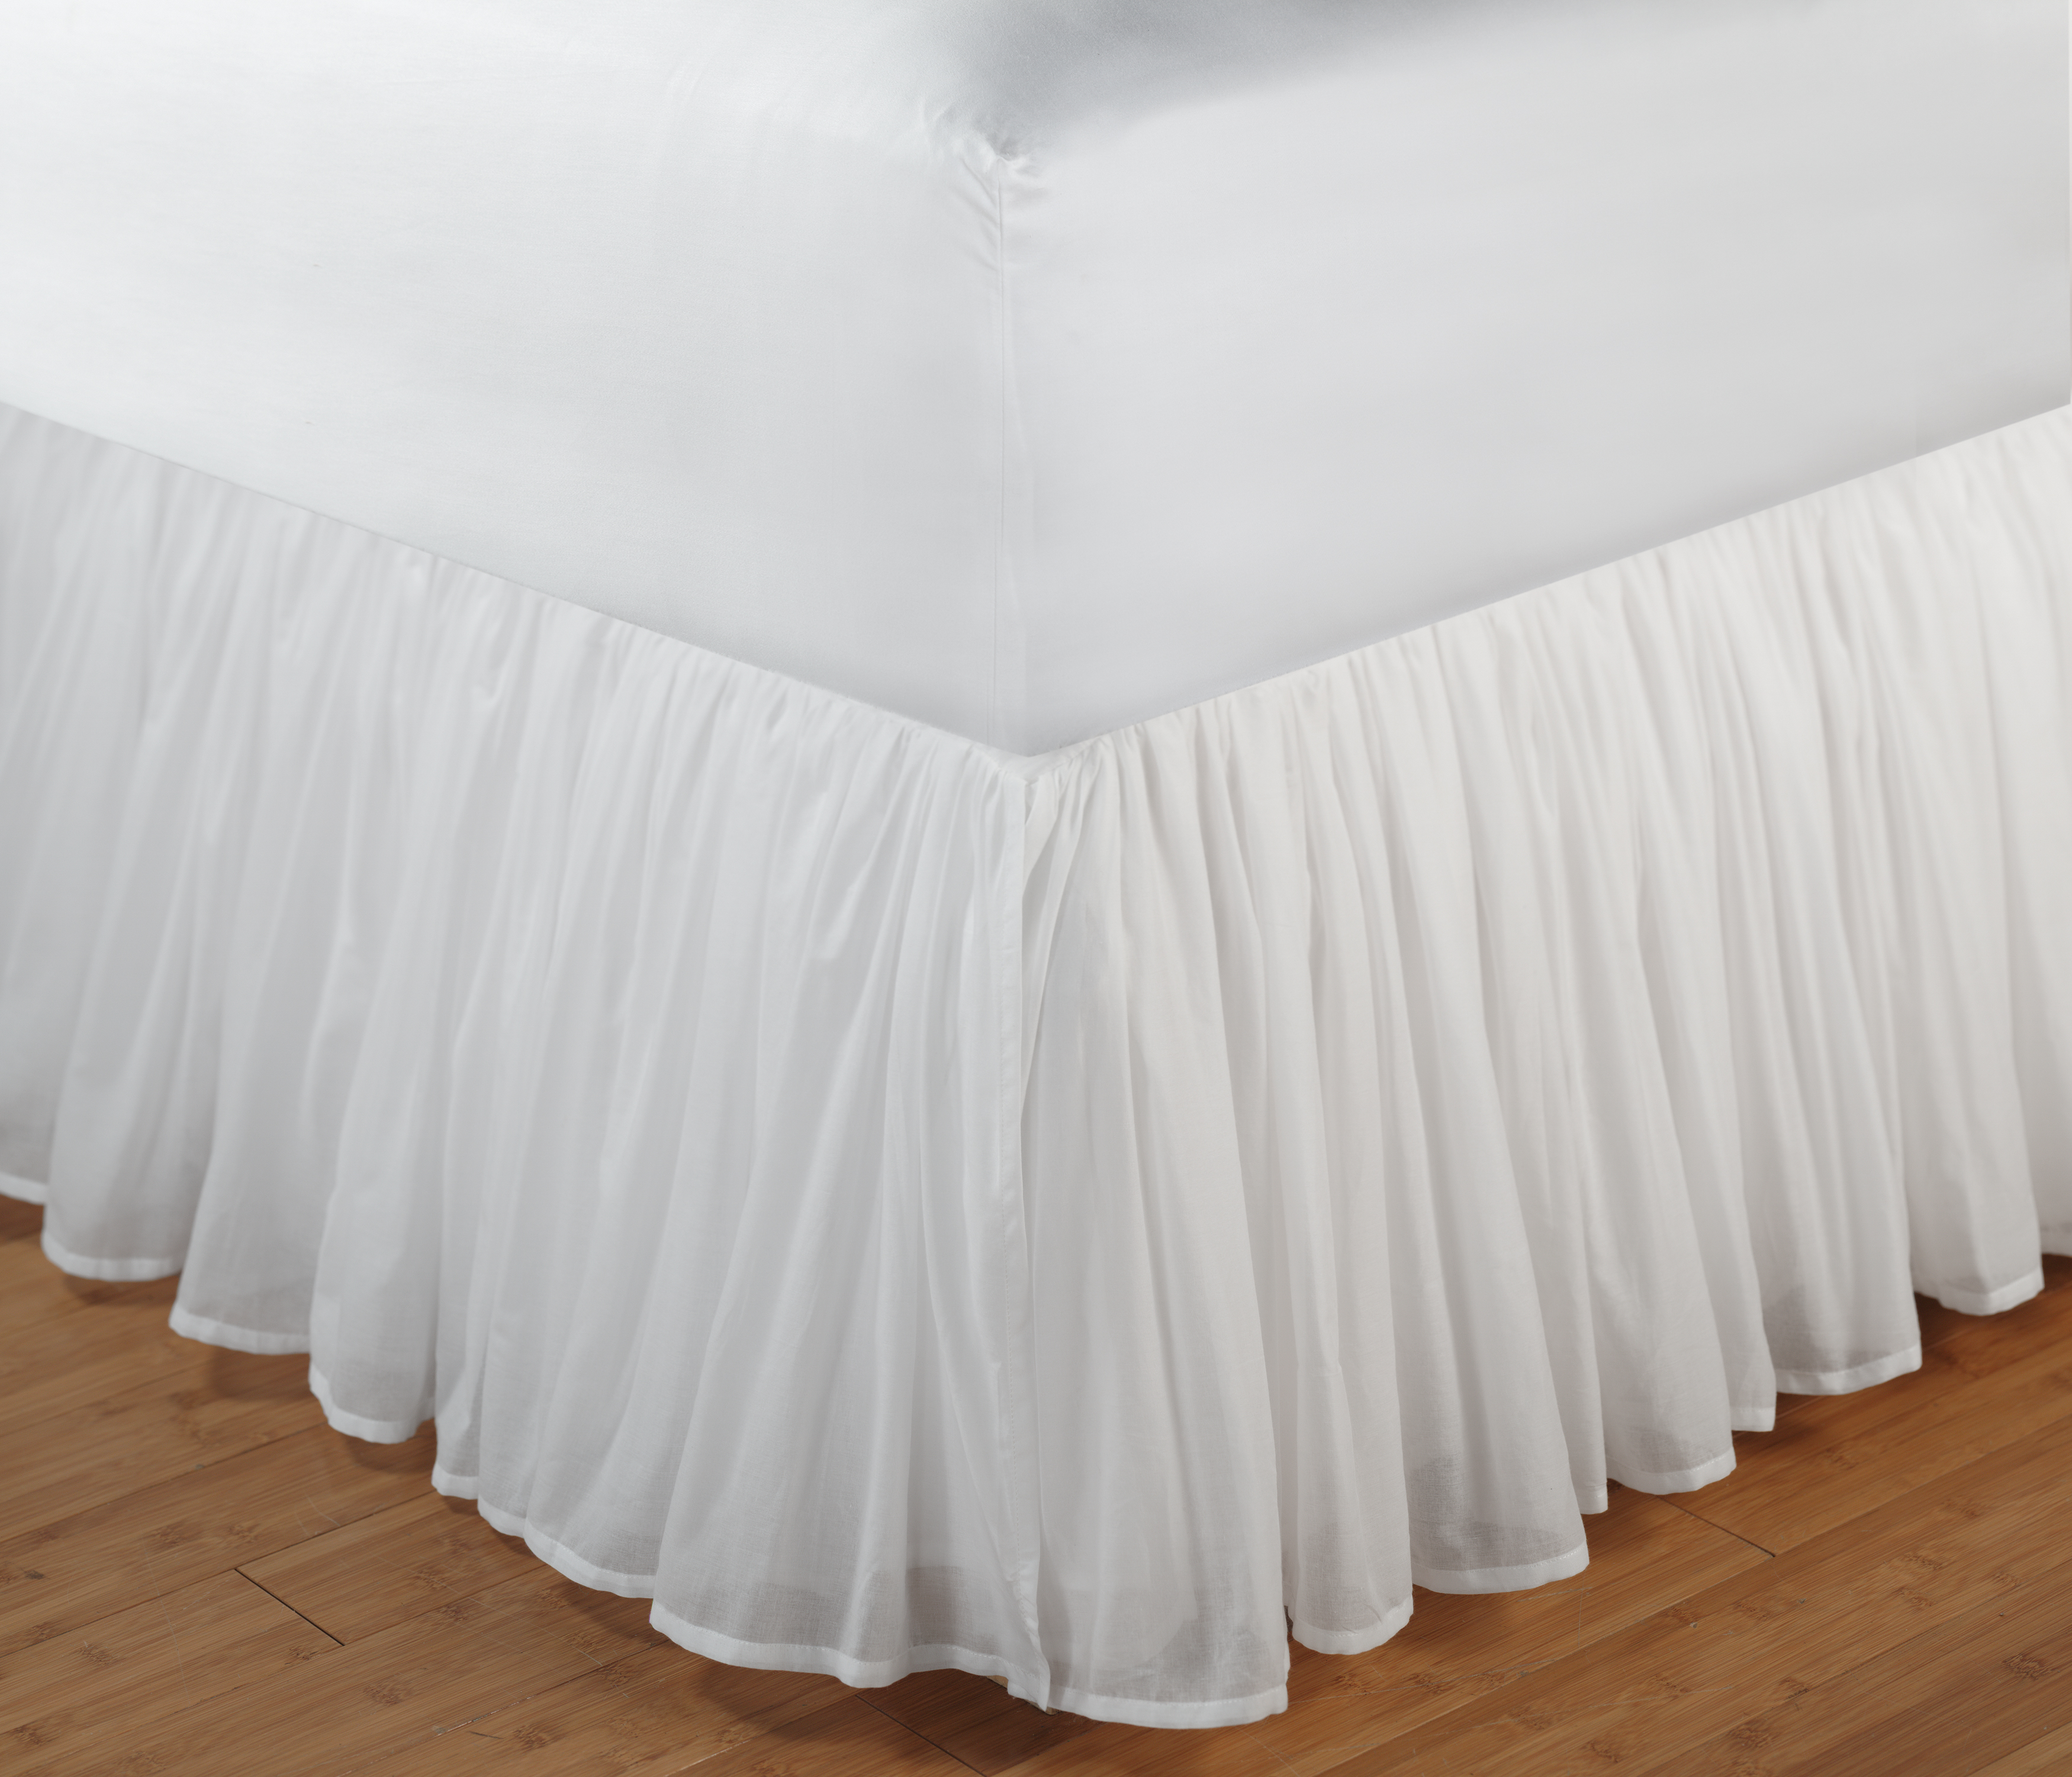 Greenland Home Fashions Cotton VoileWhiteBed Skirt 15Twin, White